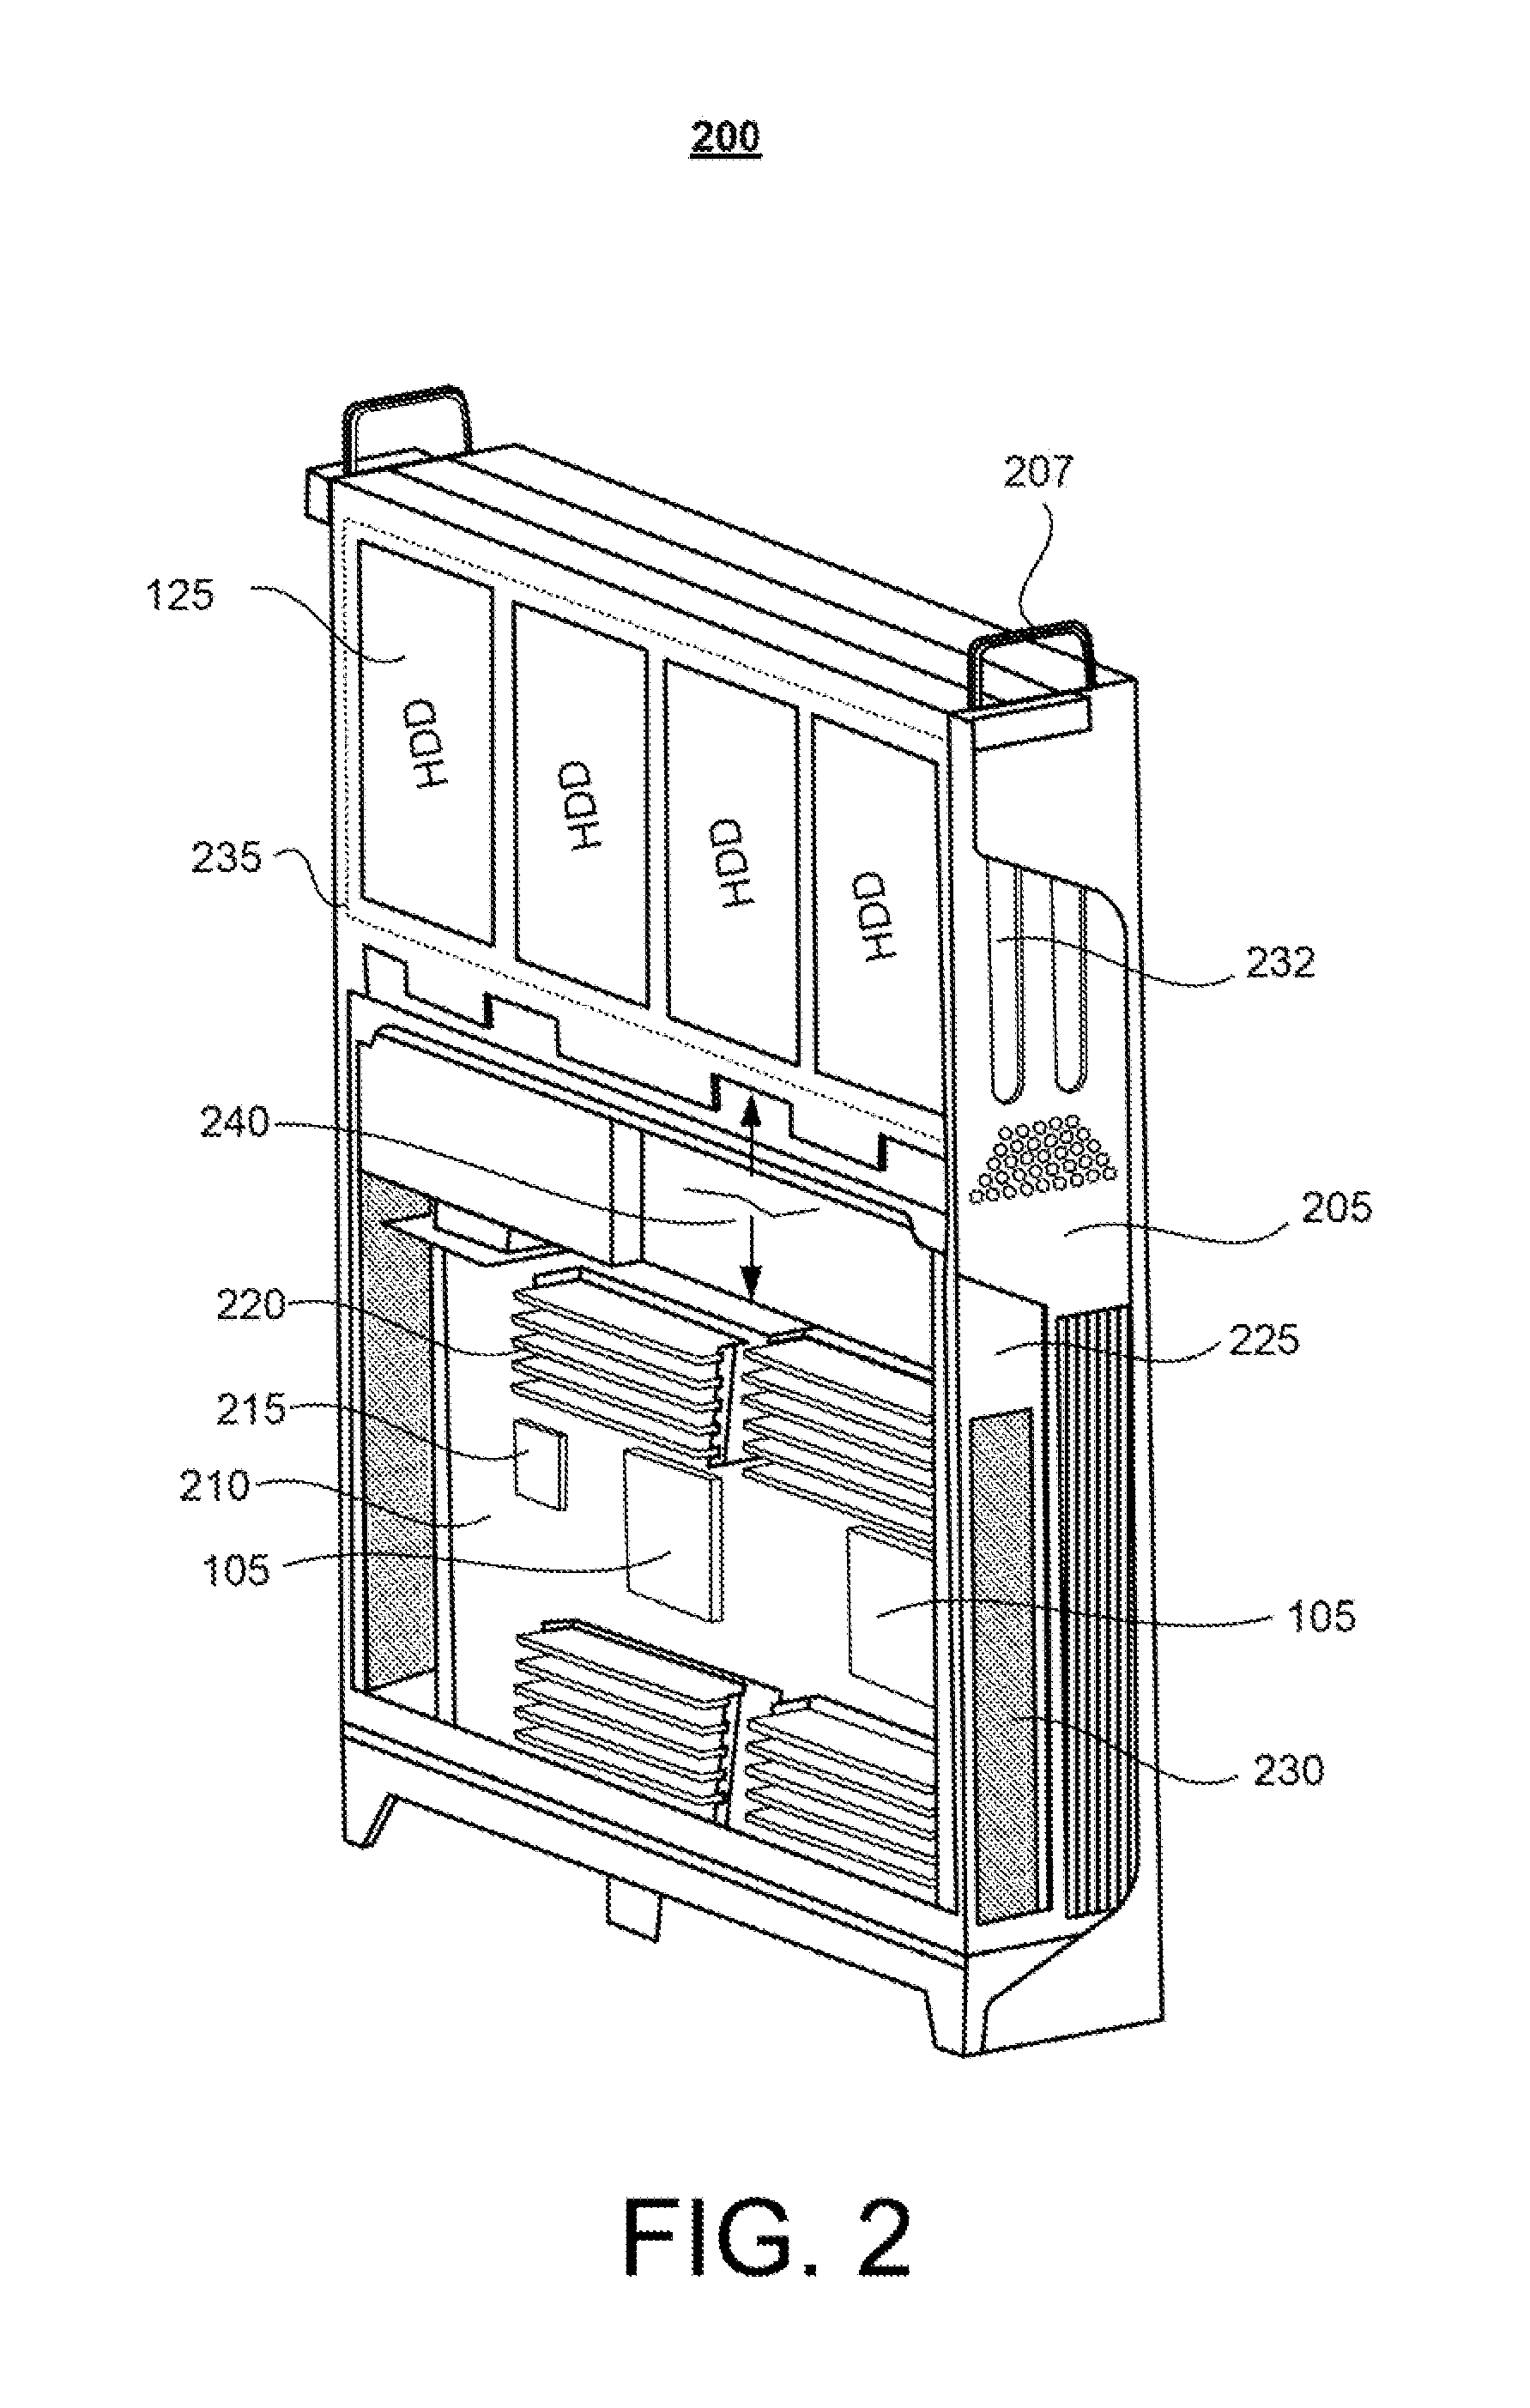 Vertically-oriented immersion server with vapor bubble deflector